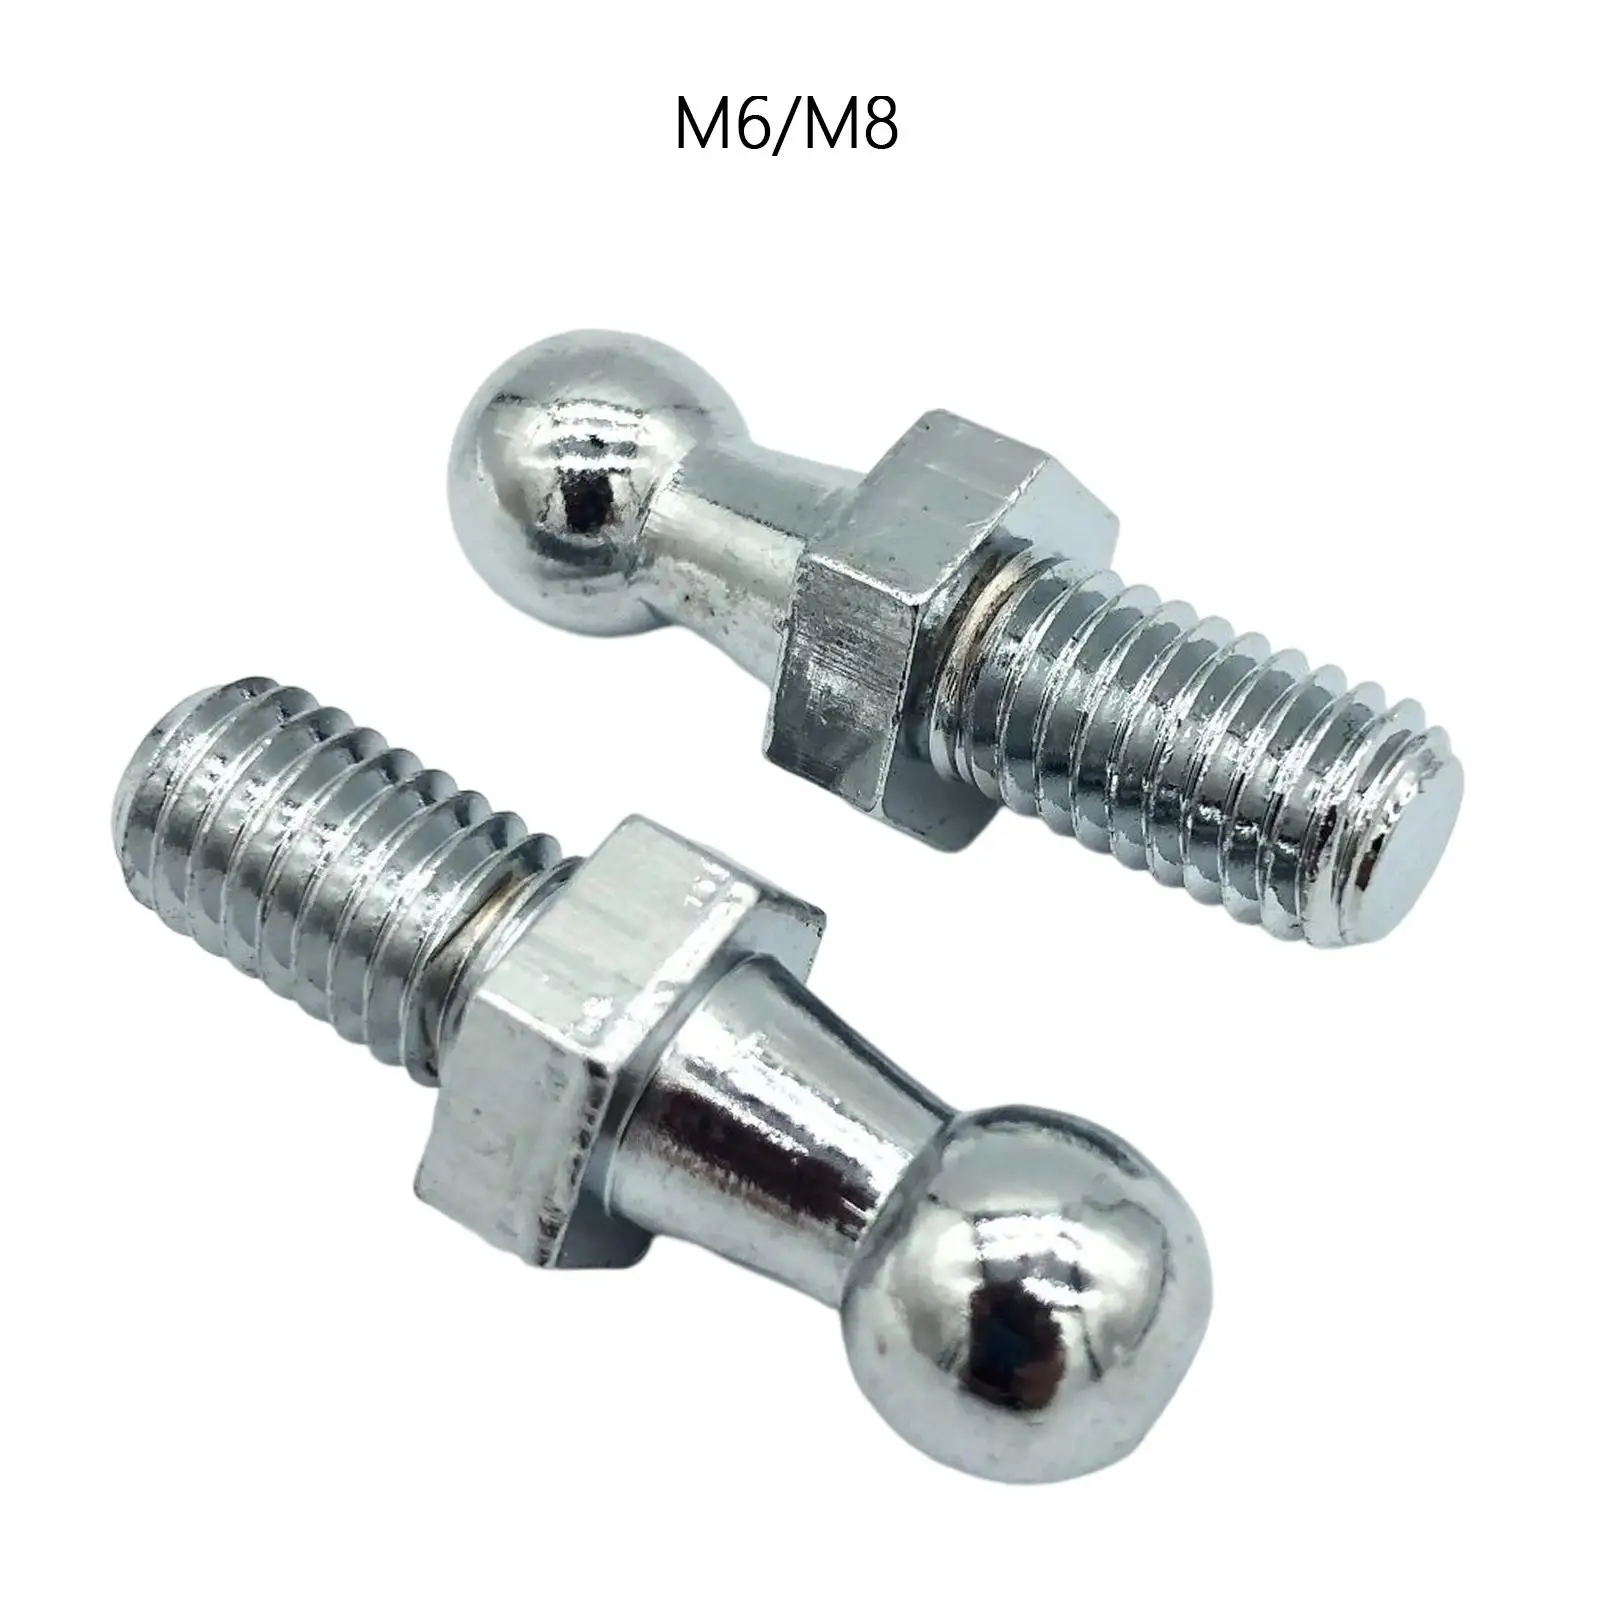 2 Pieces Ball Ended Bolt Bonnet Replaces Easy Installation Accessories Gas Strut End Fittings Universal M8 M6 Durable 10mm